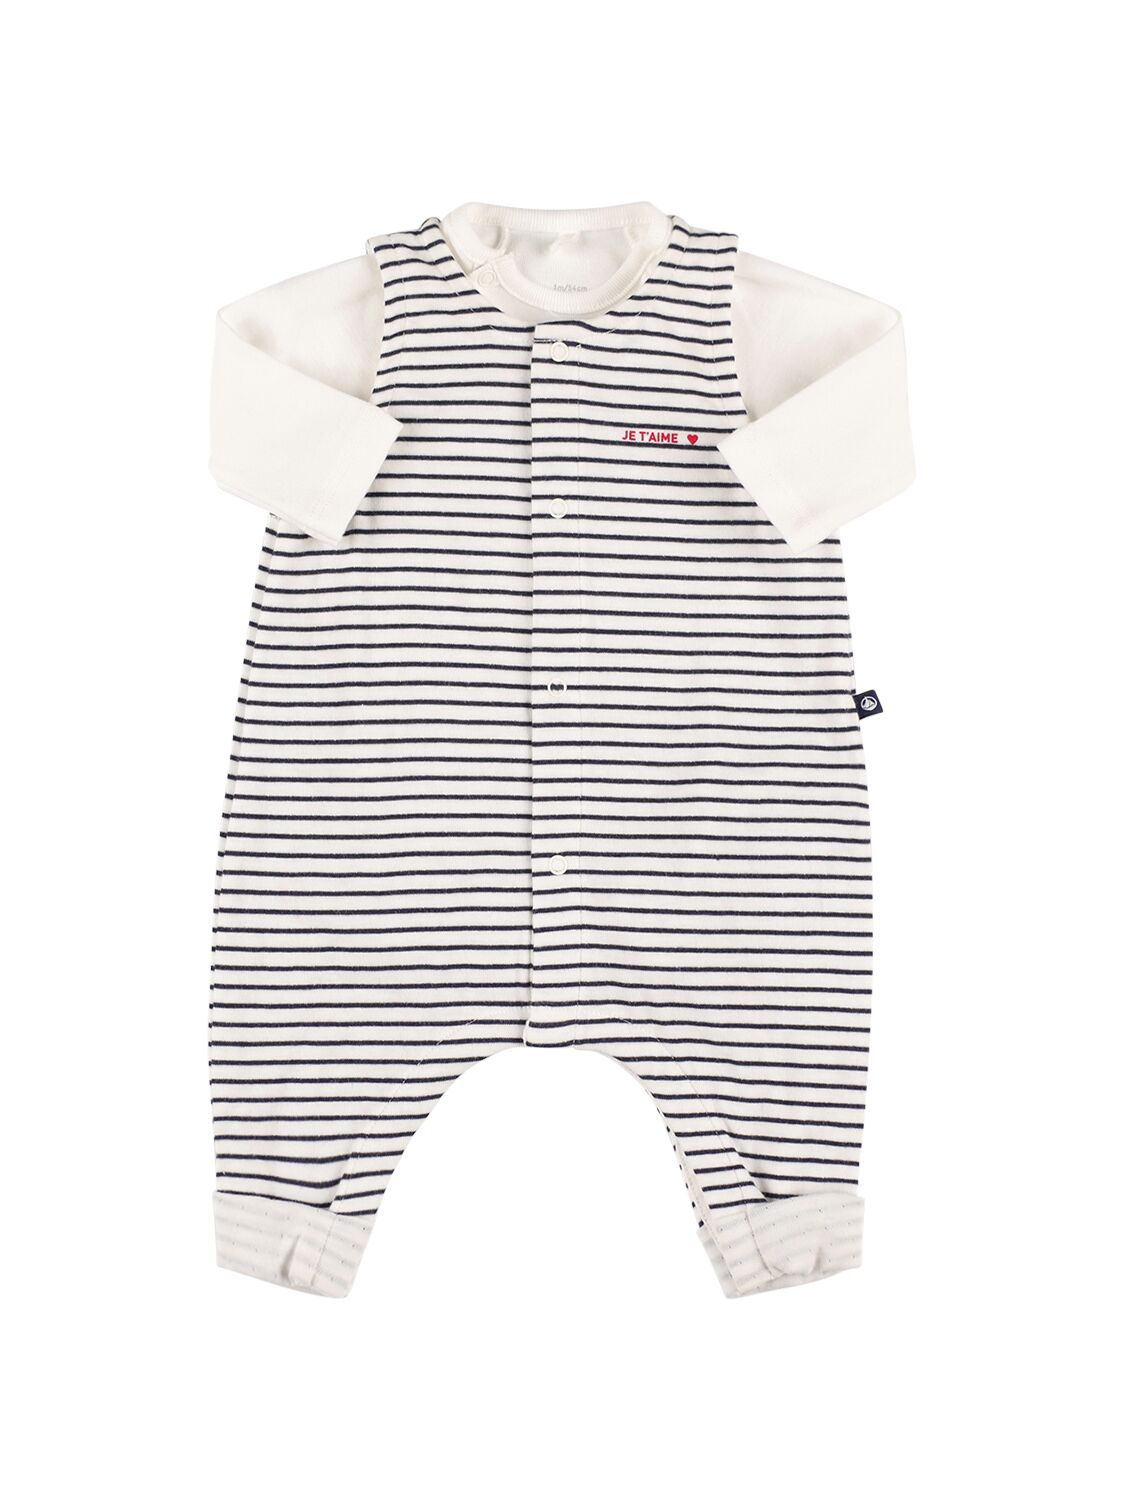 Image of Striped Cotton Overalls & T-shirt